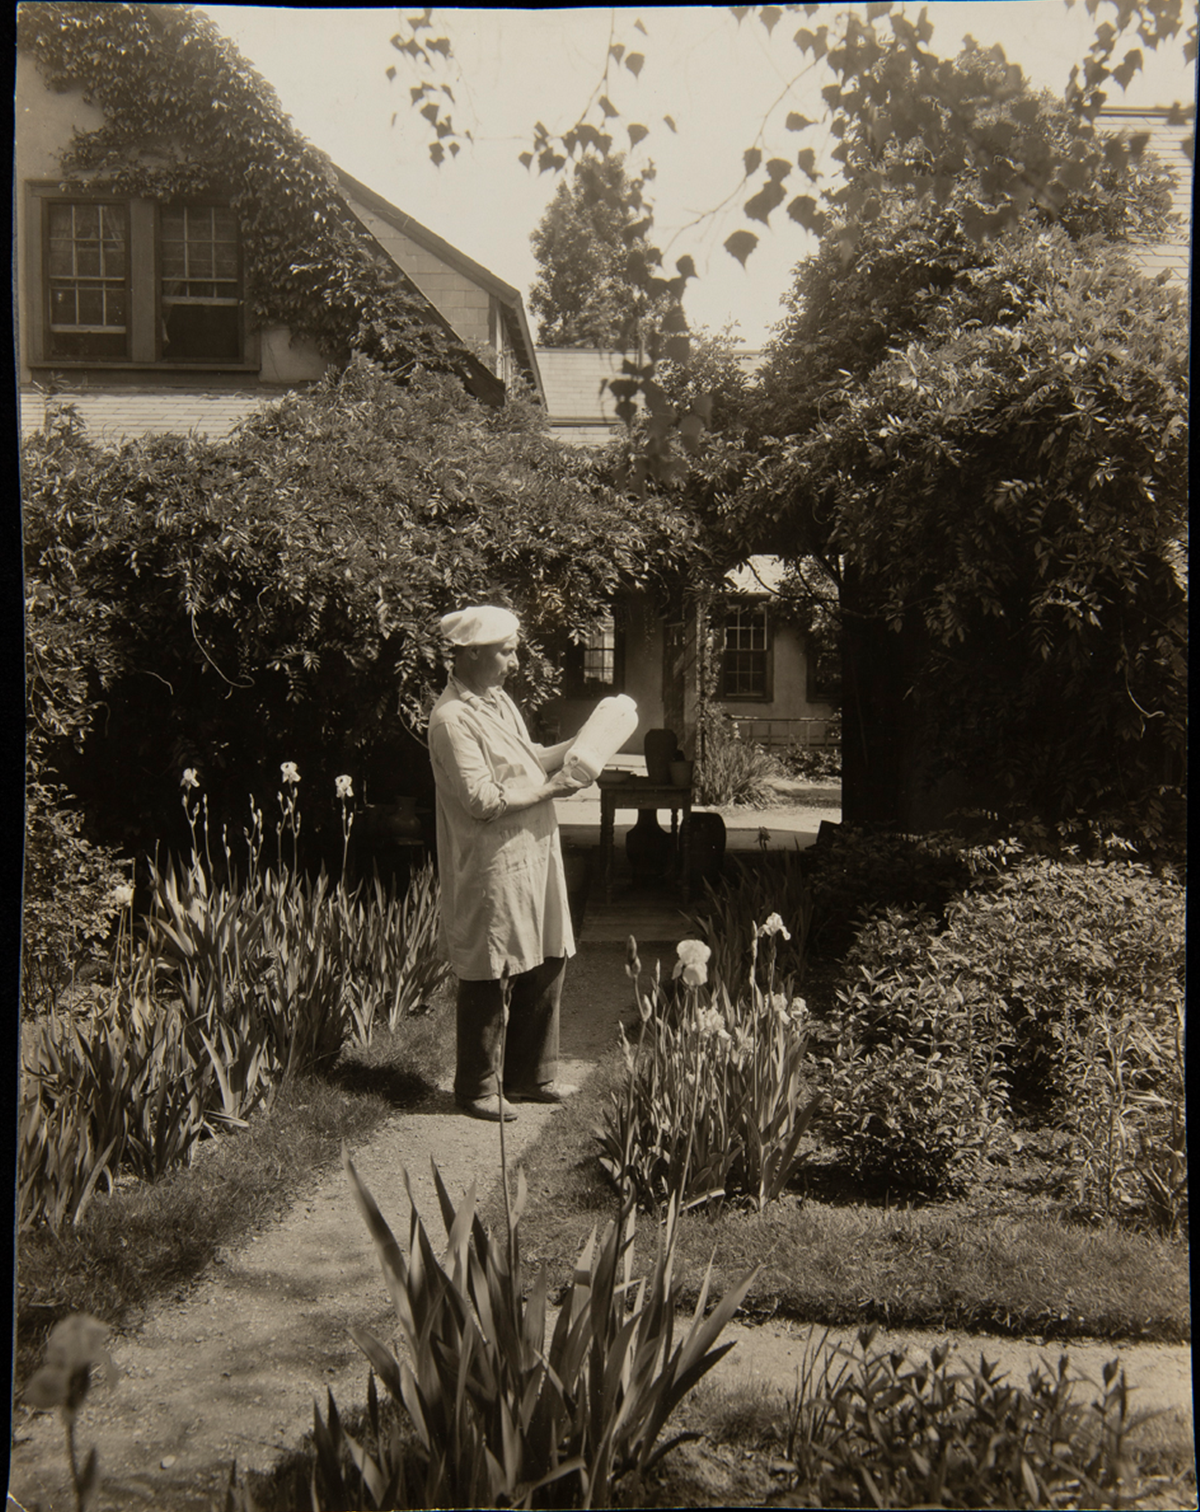 A man holds a piece of pottery in the garden of the Paul Revere Pottery, about 1930